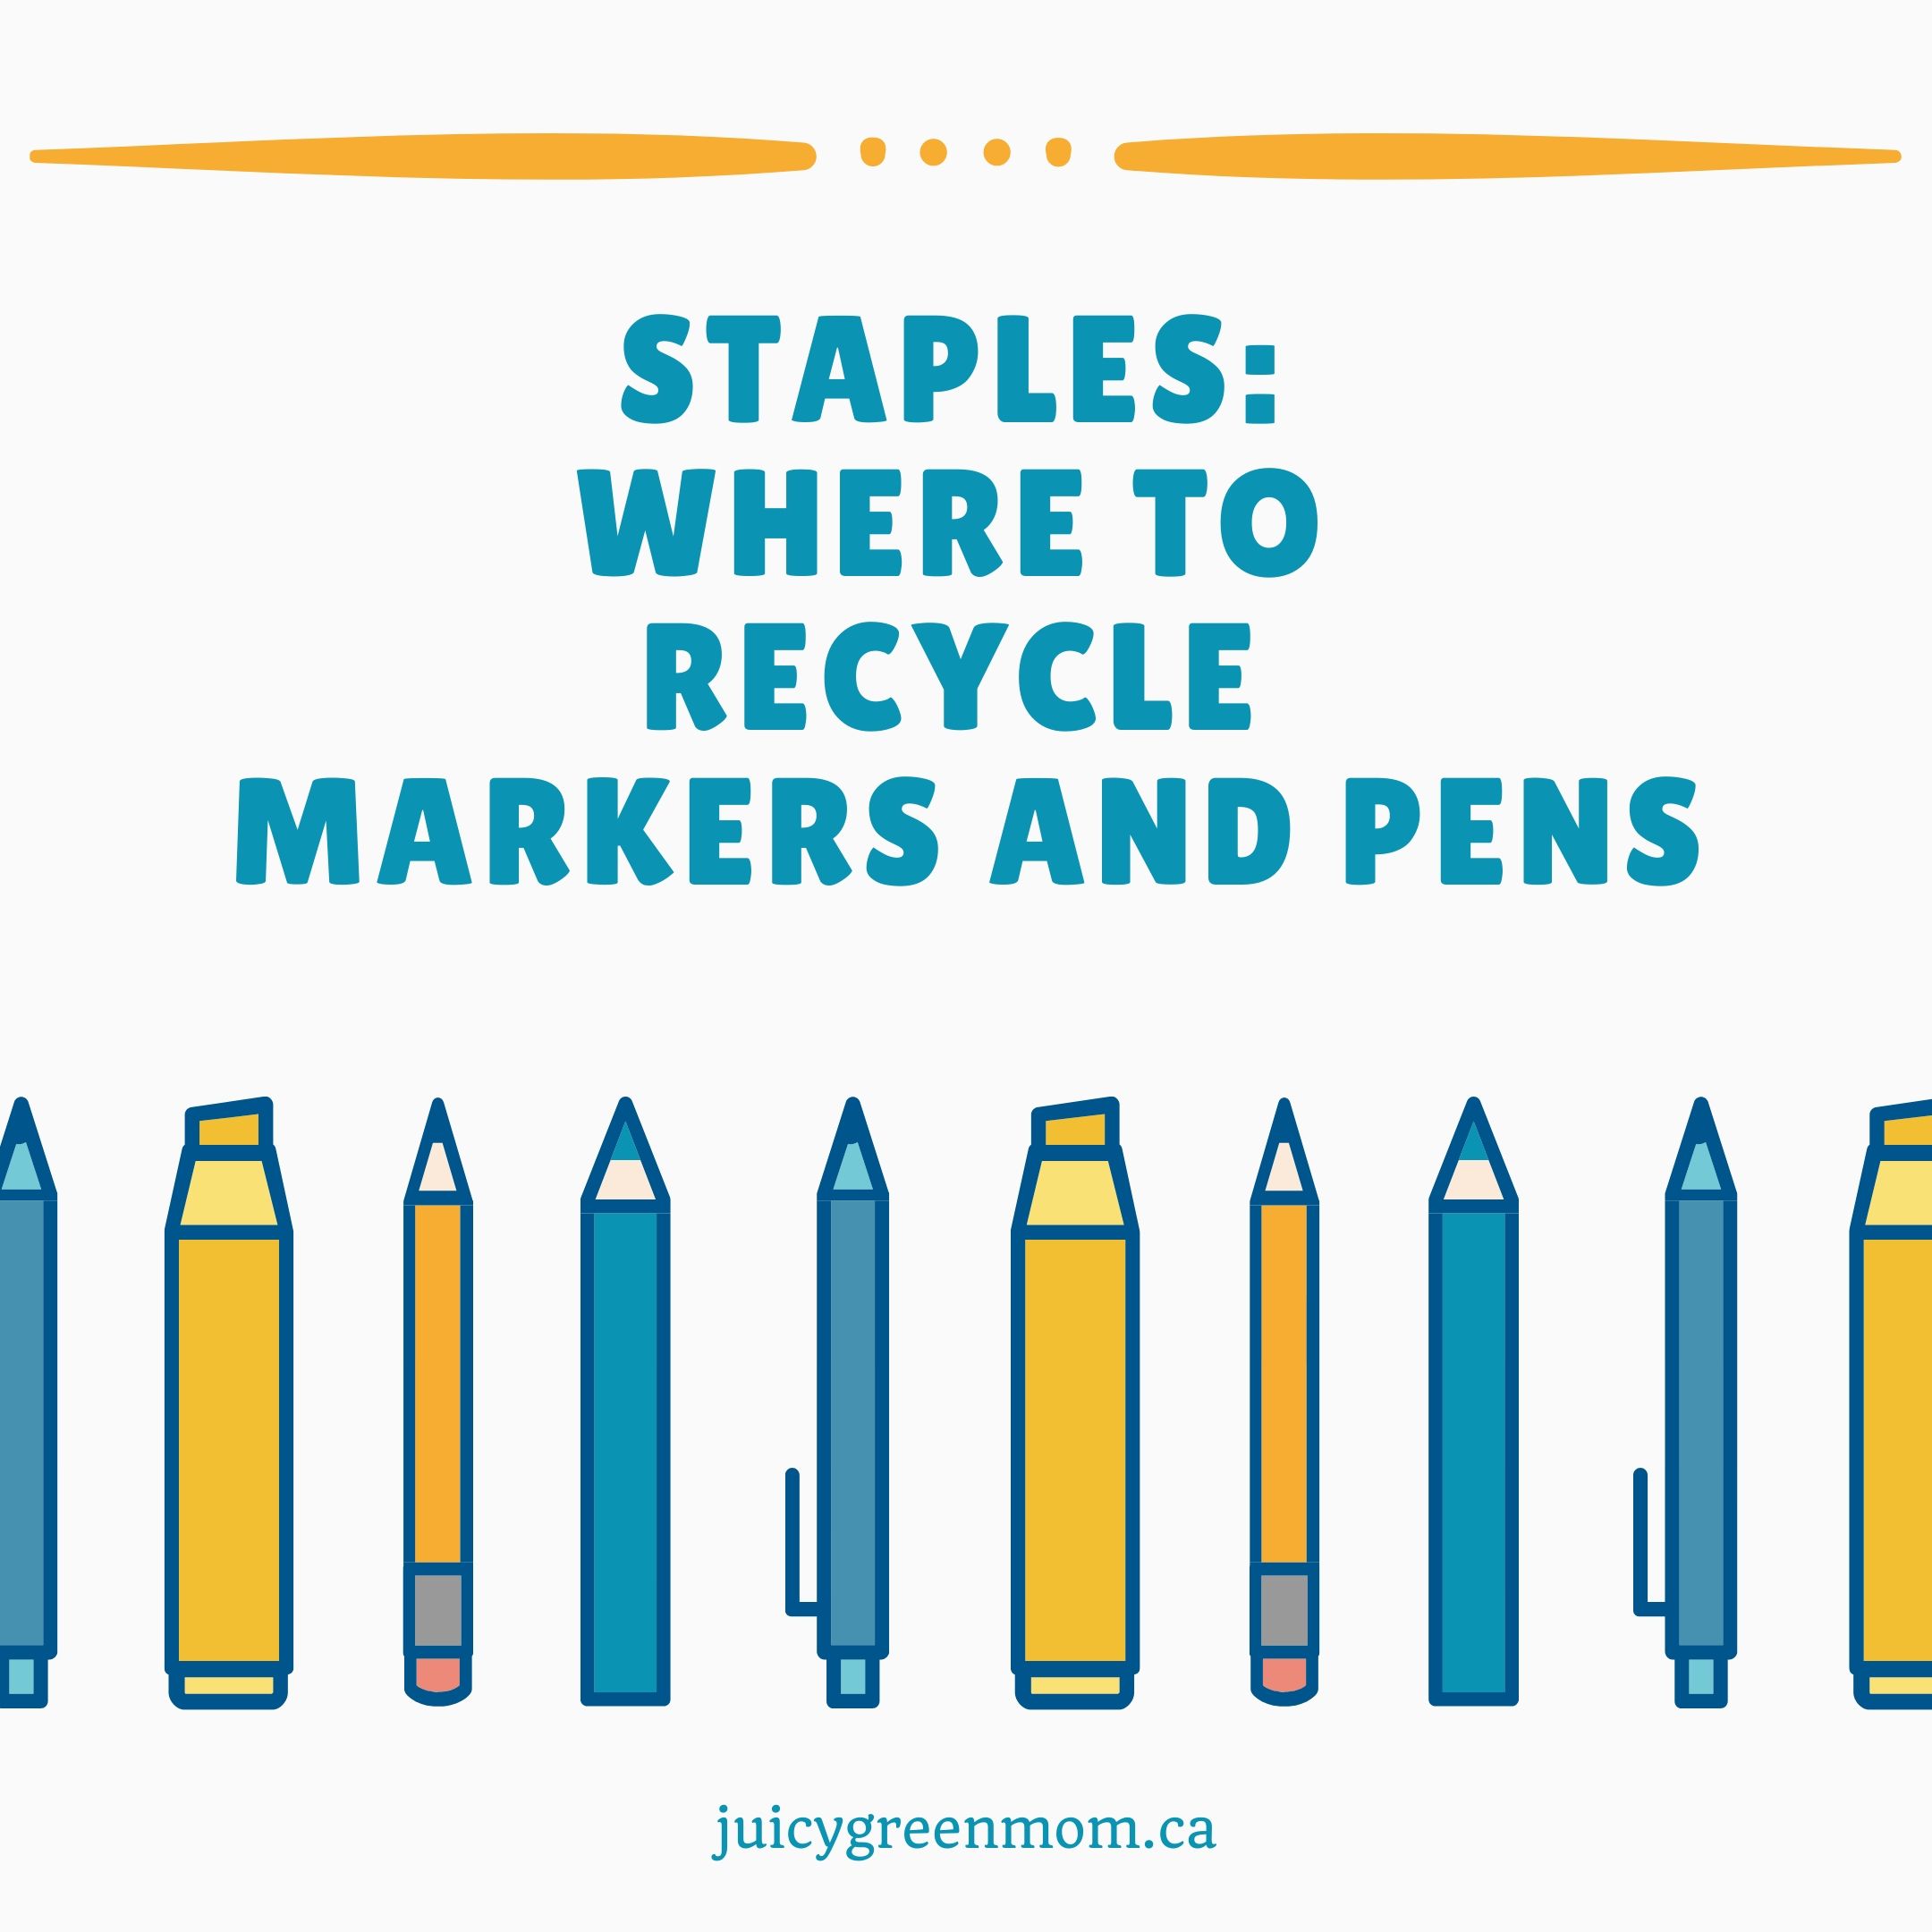 Recycling Pens and Markers